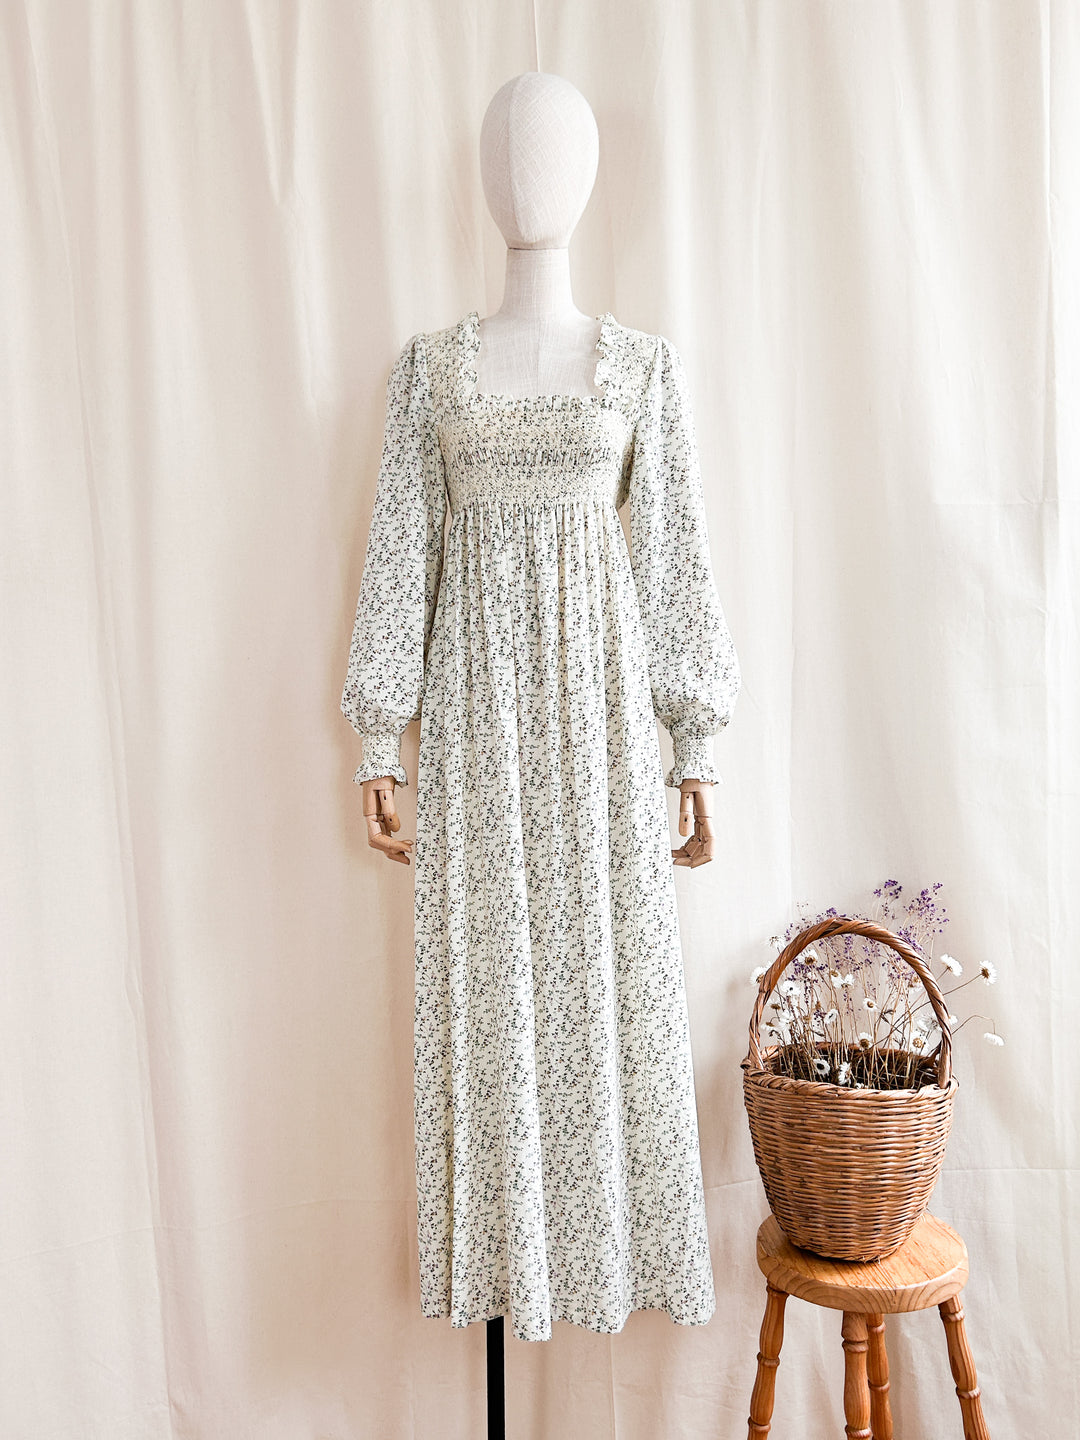 Bennett ~ Stunning rare 1970s ditsy floral smocked cotton prairie dress by Michael Sinclair